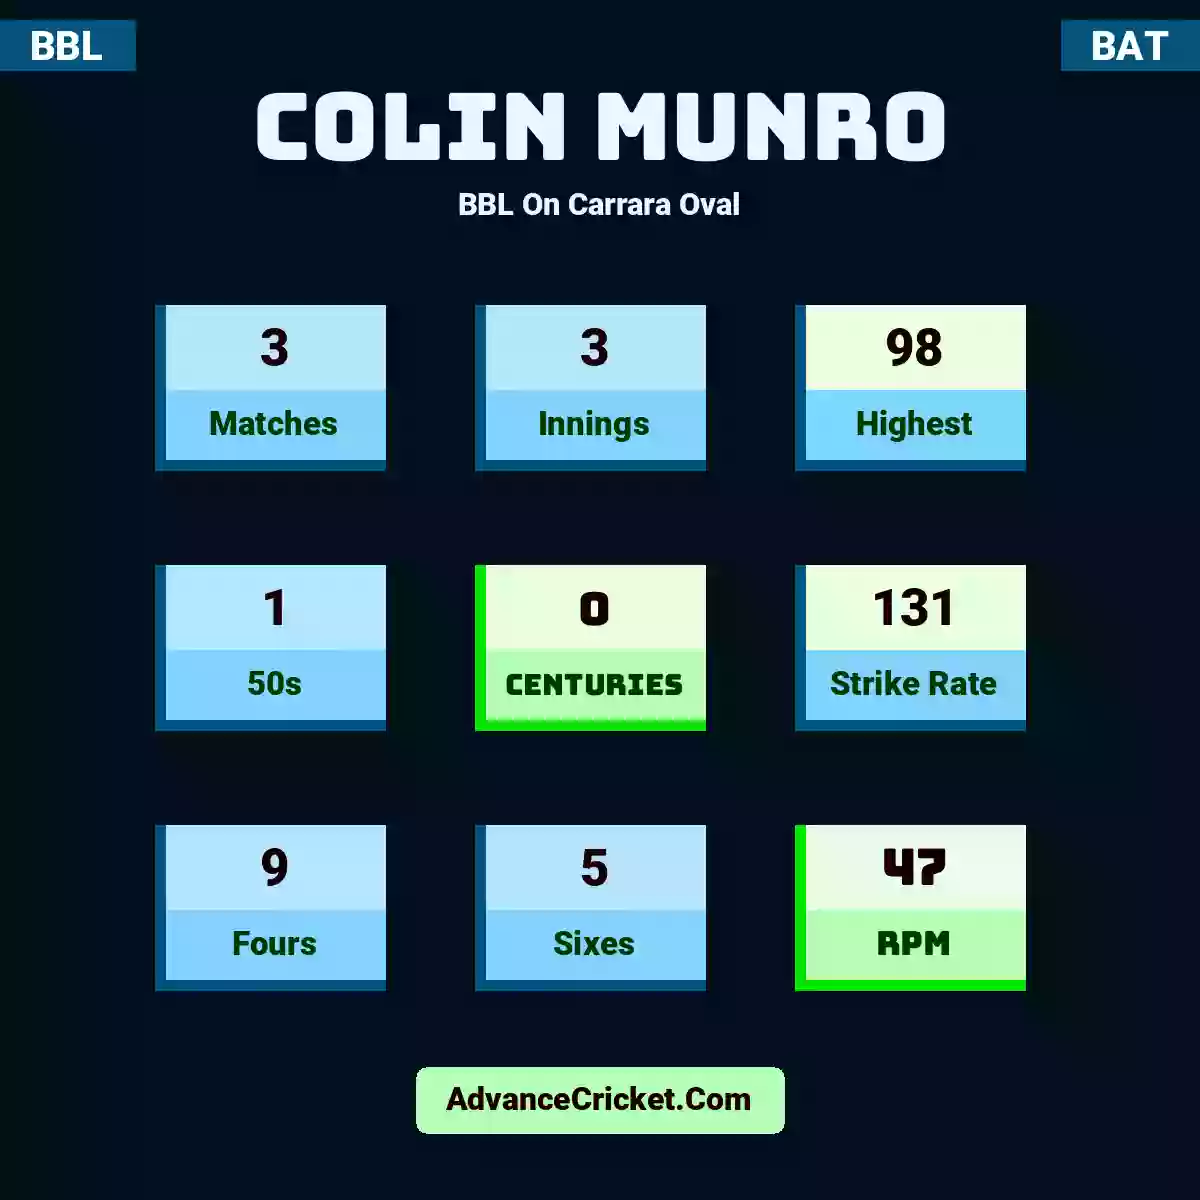 Colin Munro BBL  On Carrara Oval, Colin Munro played 3 matches, scored 98 runs as highest, 1 half-centuries, and 0 centuries, with a strike rate of 131. C.Munro hit 9 fours and 5 sixes, with an RPM of 47.